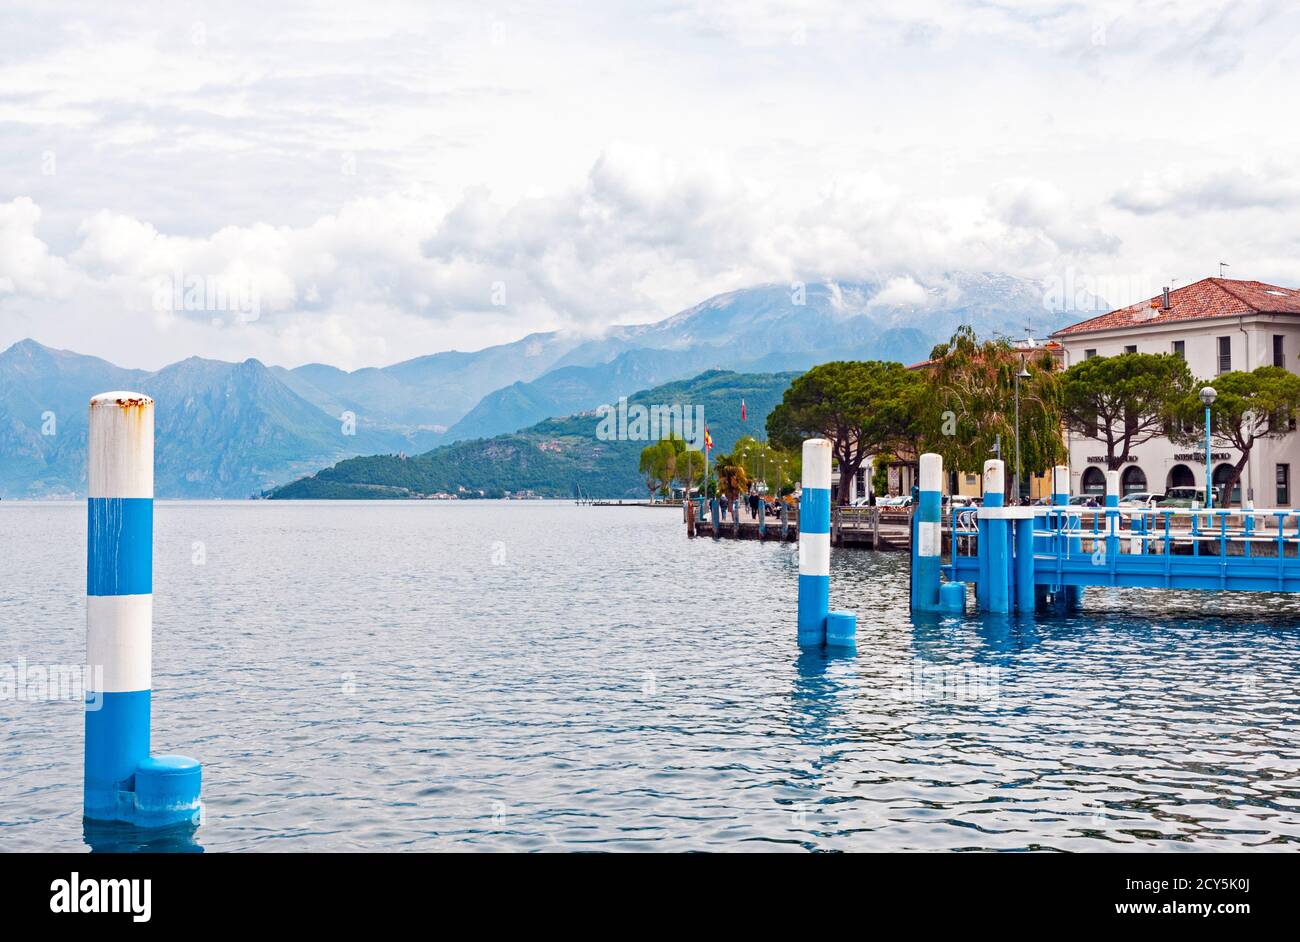 Lago d'Iseo from the town of Iseo, Lombardy region, Italy Stock Photo